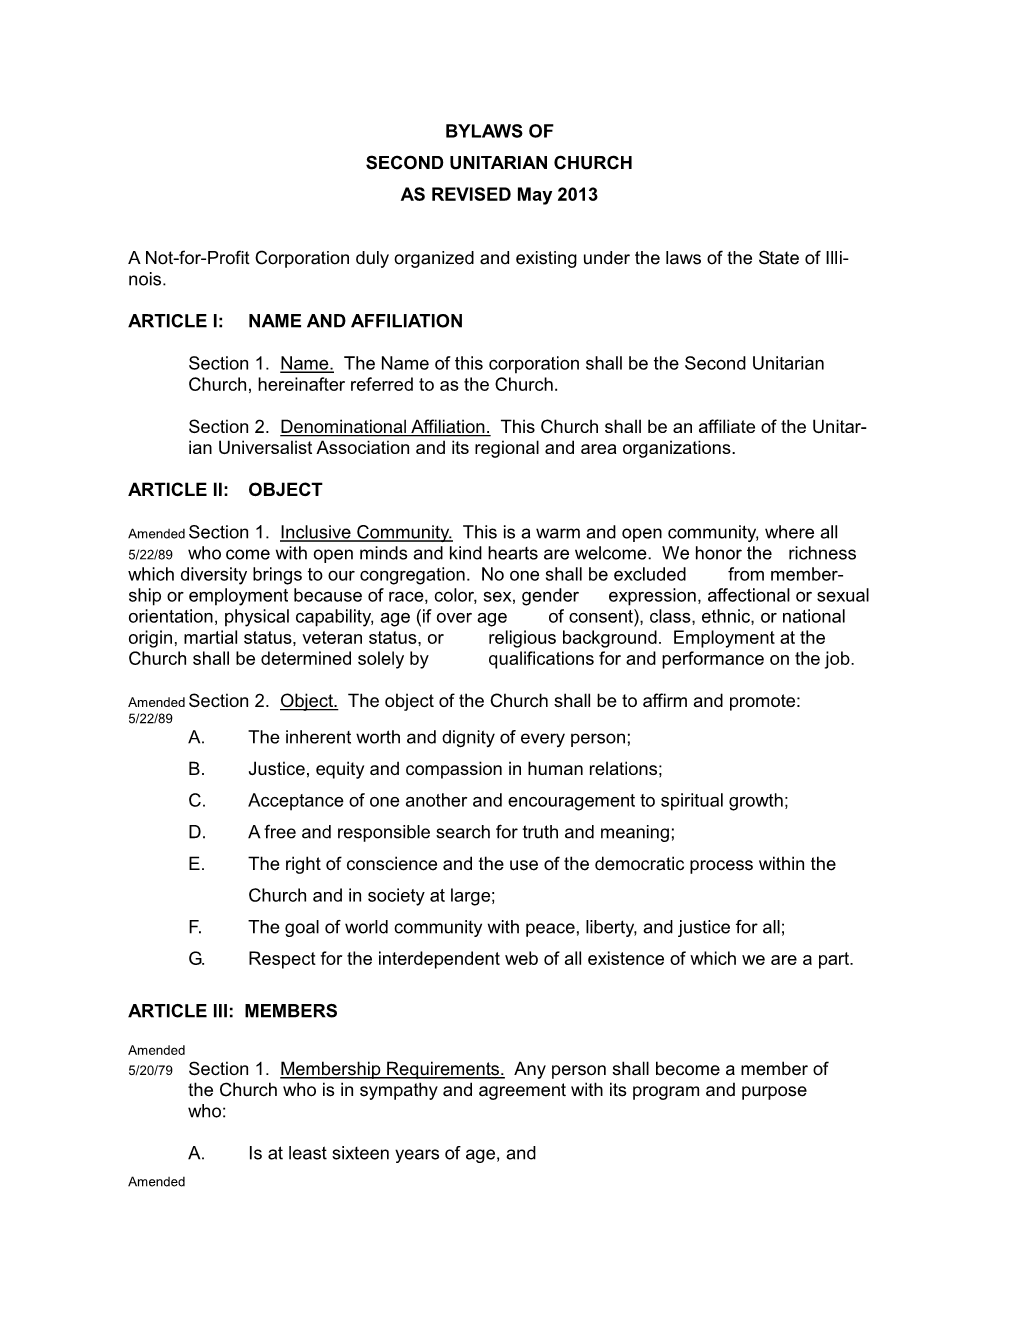 BYLAWS of SECOND UNITARIAN CHURCH AS REVISED May 2013